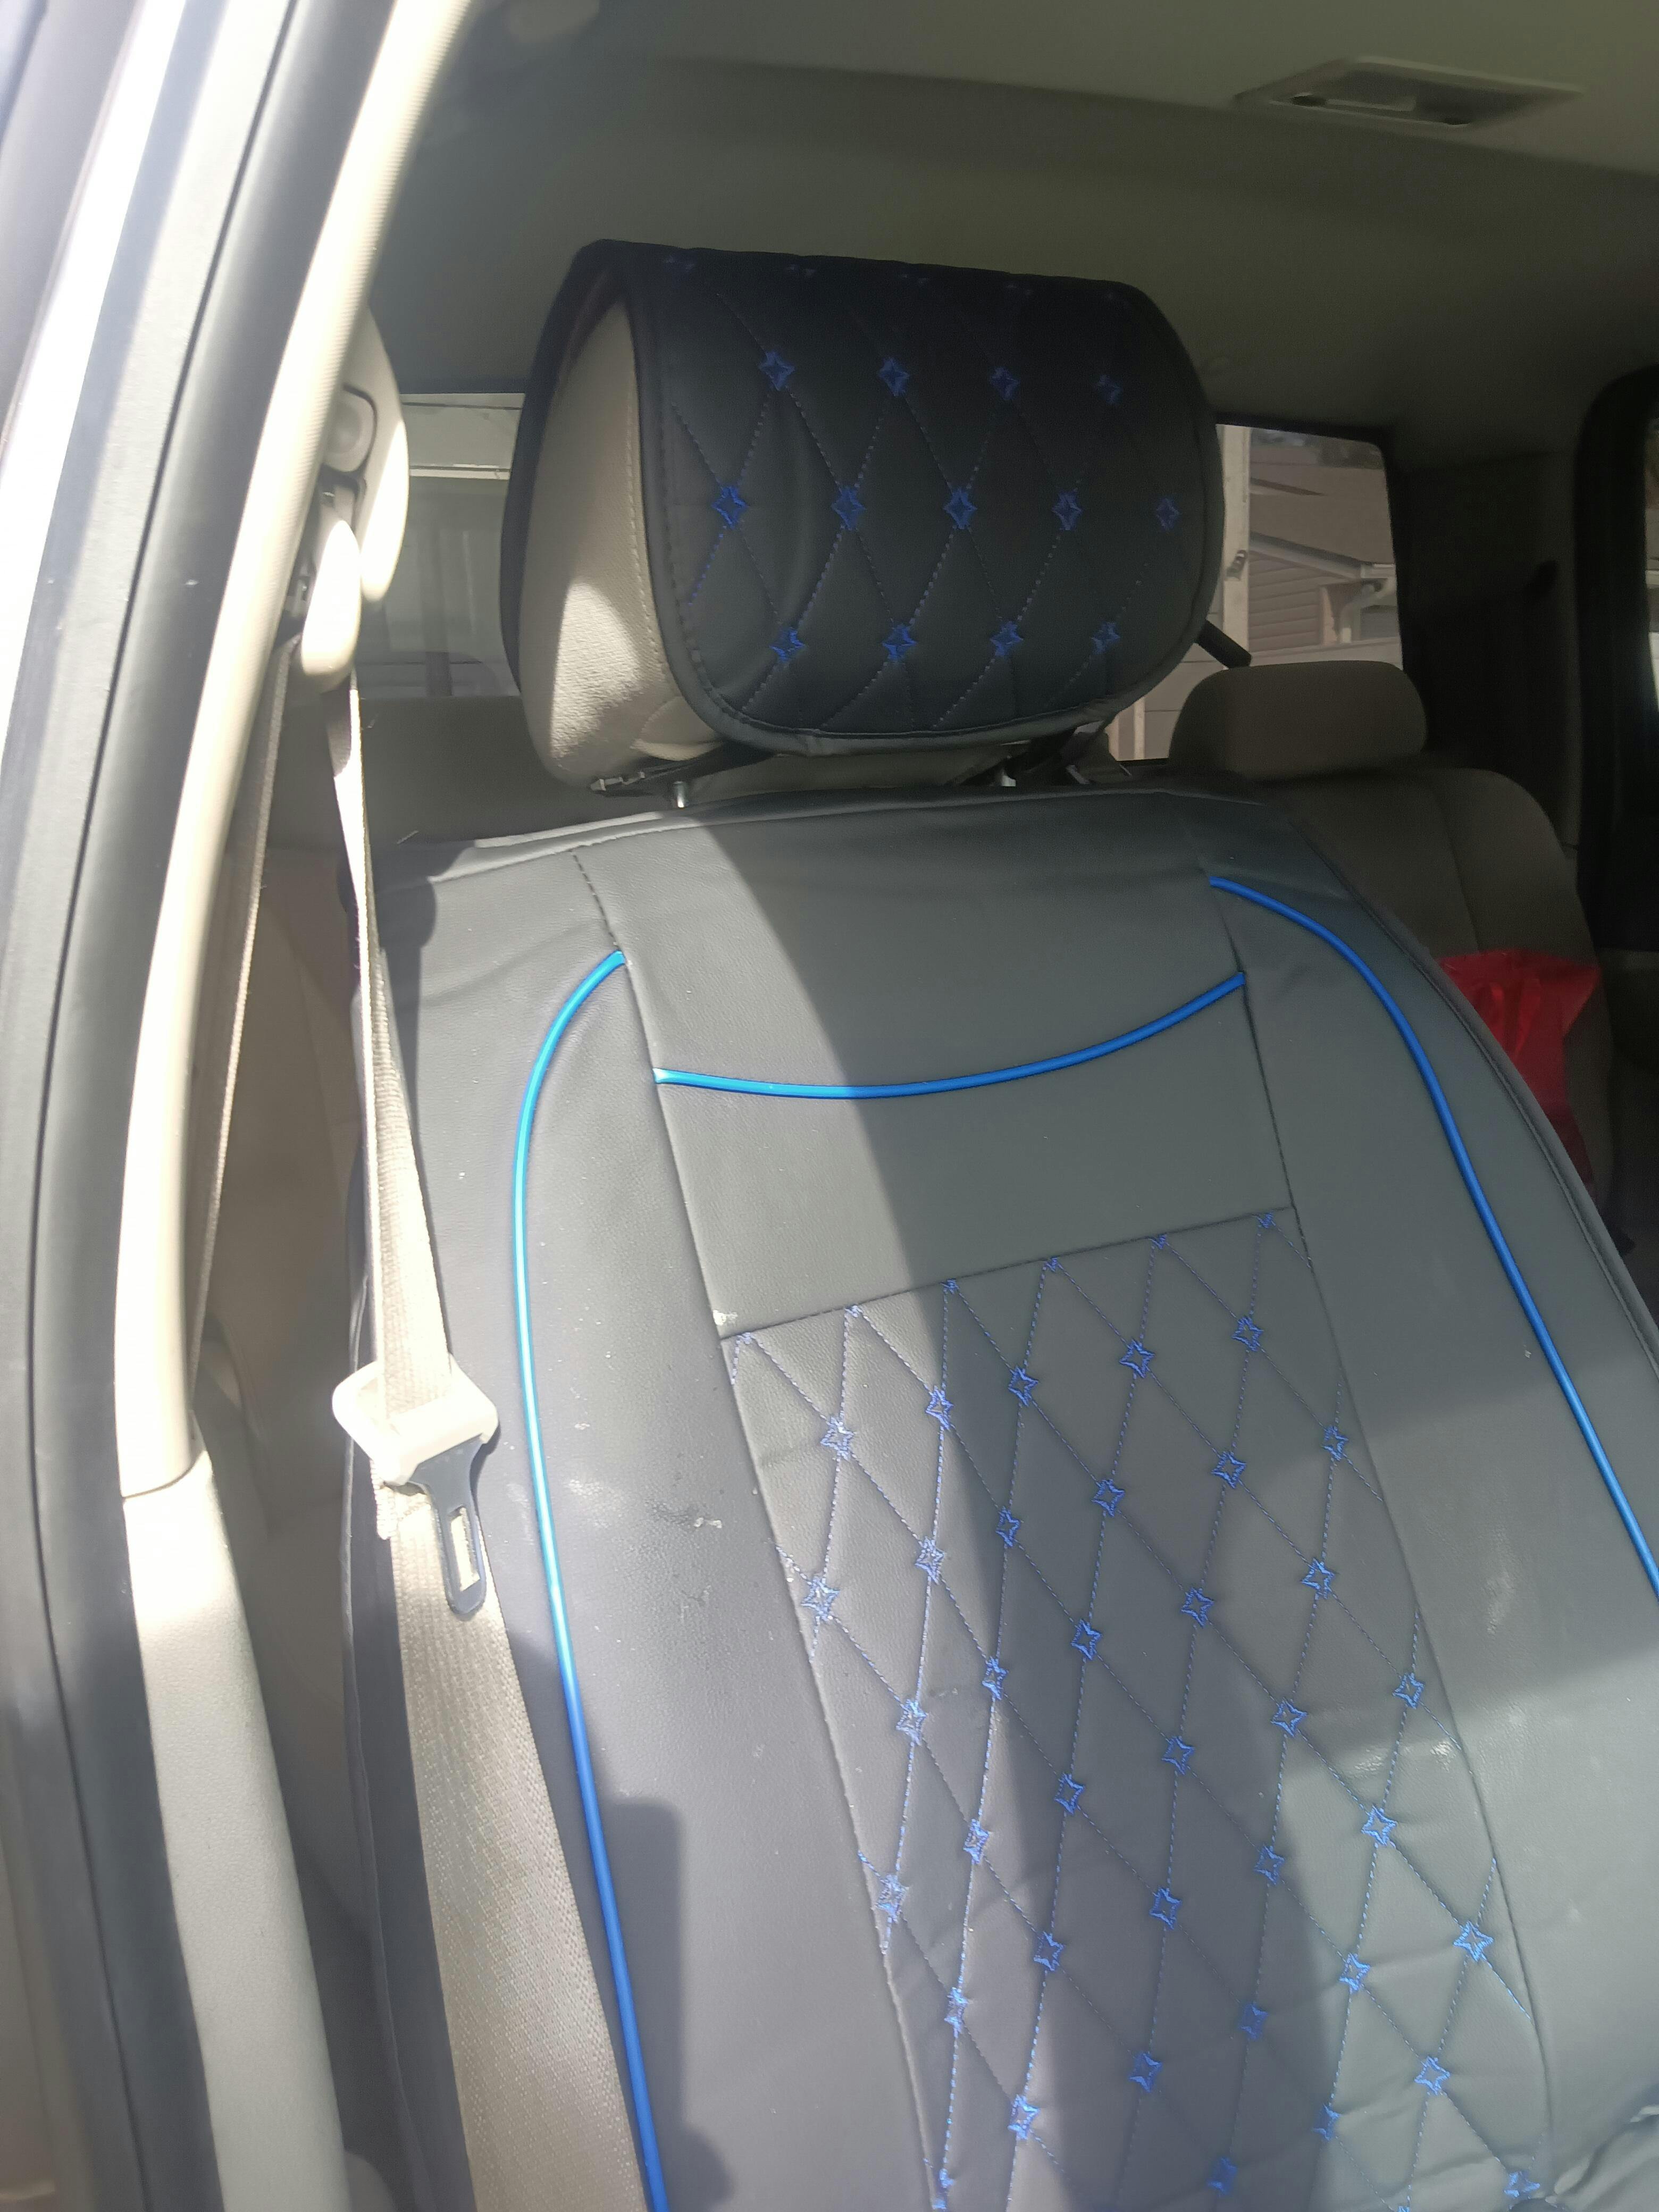 ELUTO Car Front Seat Covers : : Automotive